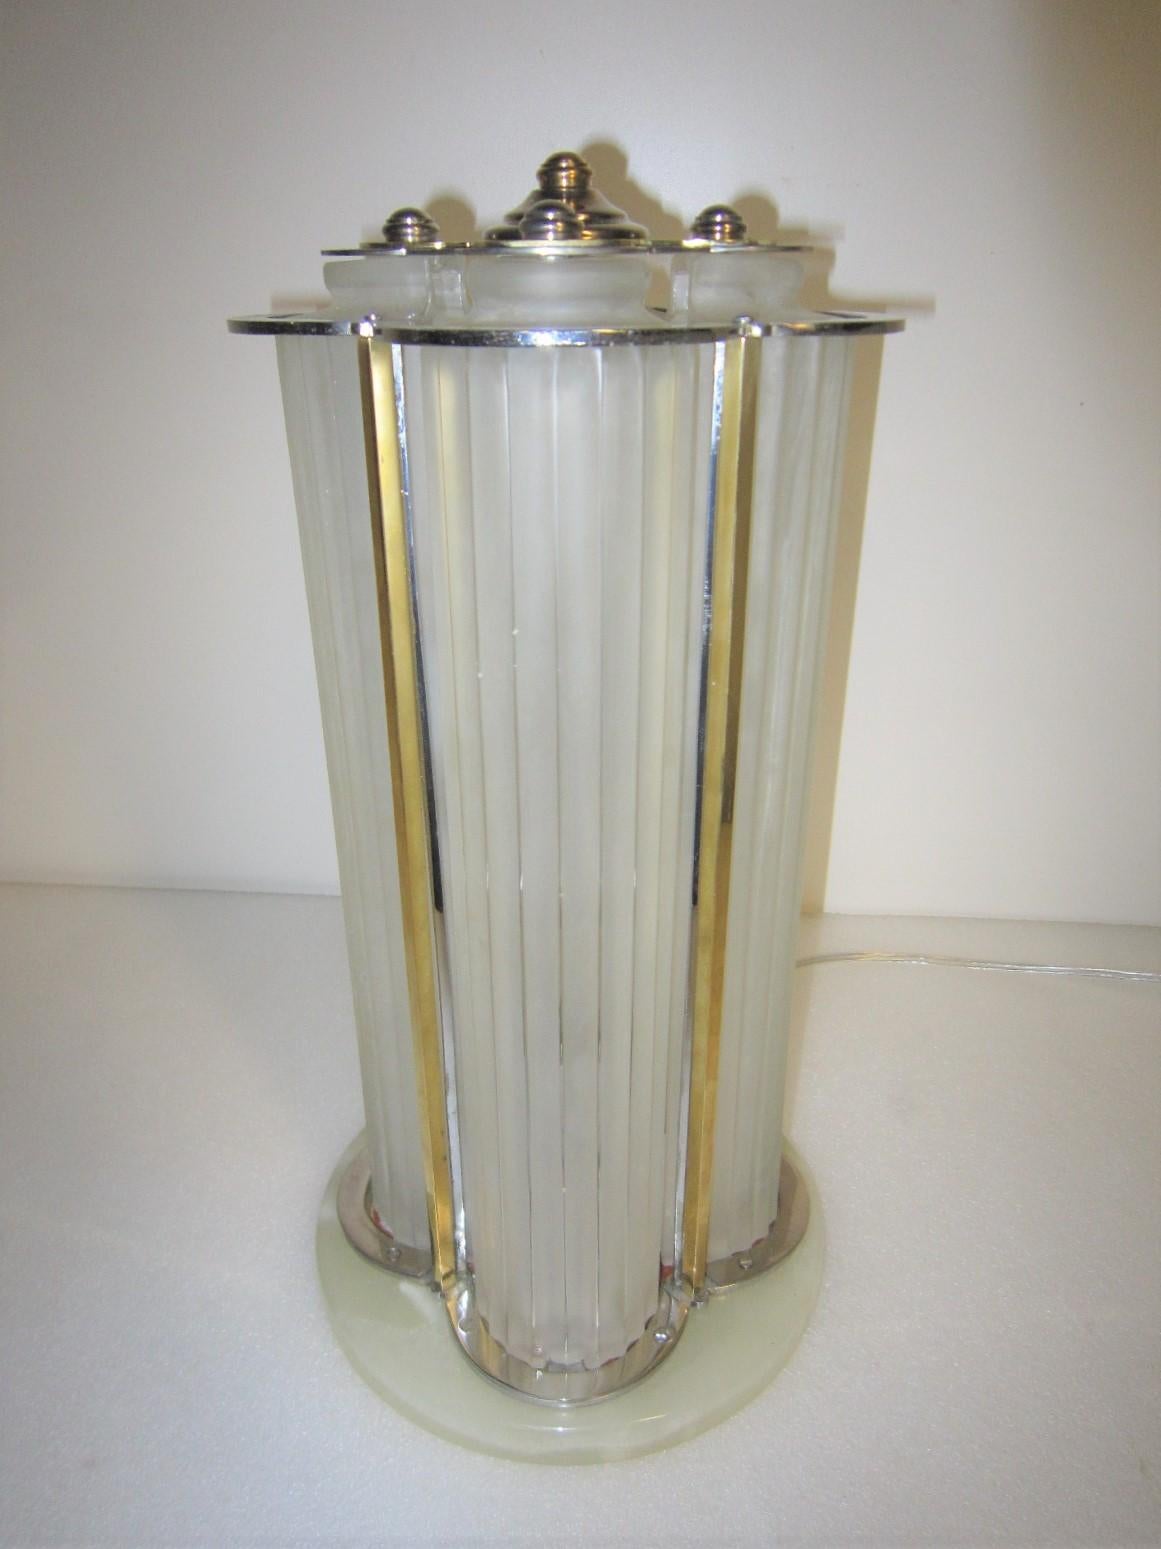 An original French Art Deco table lamp by Marius-Ernest Sabino. Four elongated fluted and frosted art glass panels in an overall clover shape grace a nickeled bronze and brass accented elegant armature that is topped by a decorative but simple